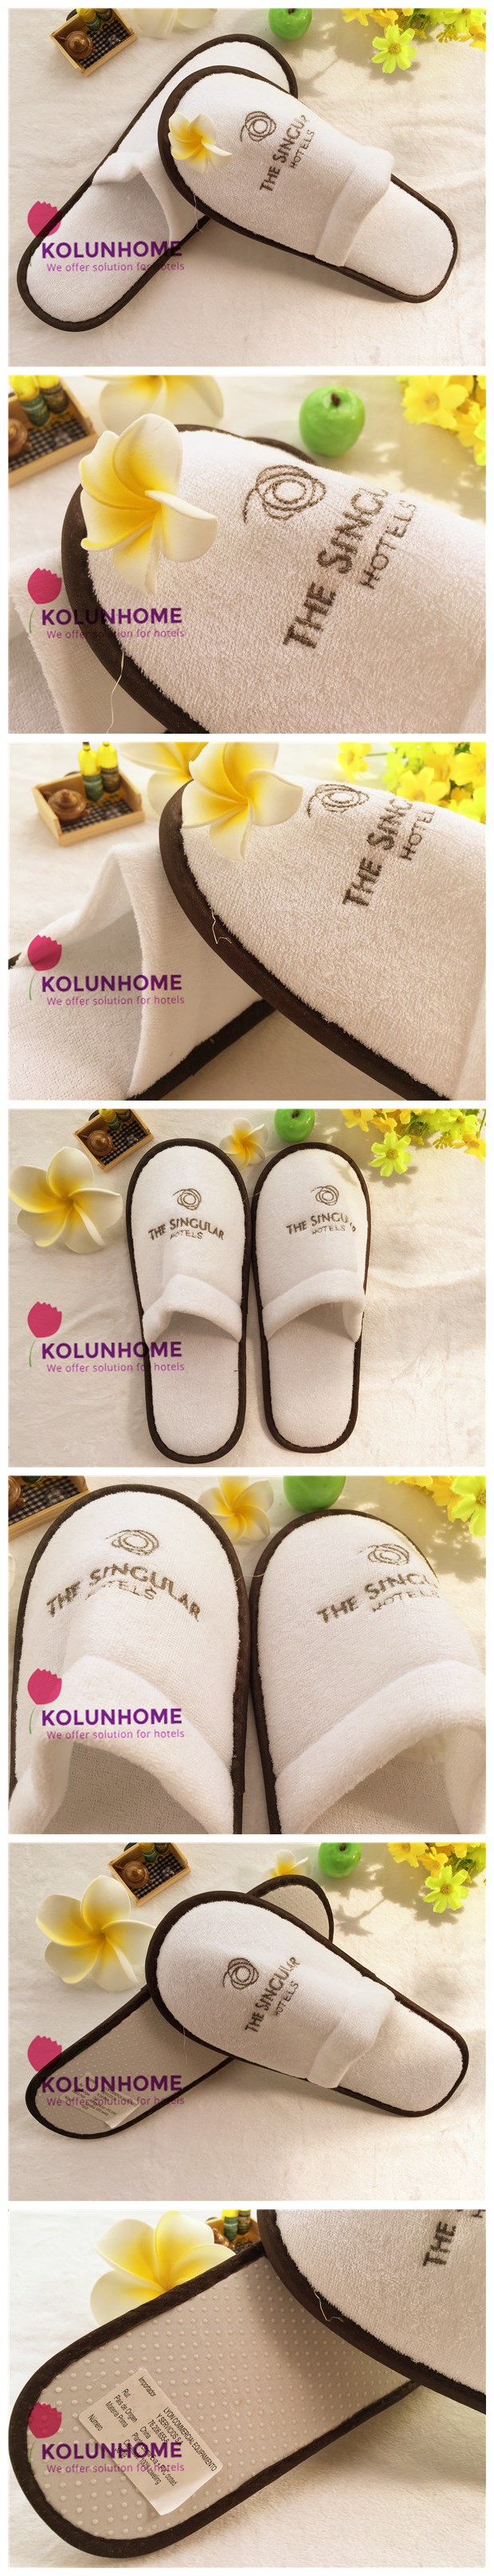 Senior terry towel slipper with embroidary logo